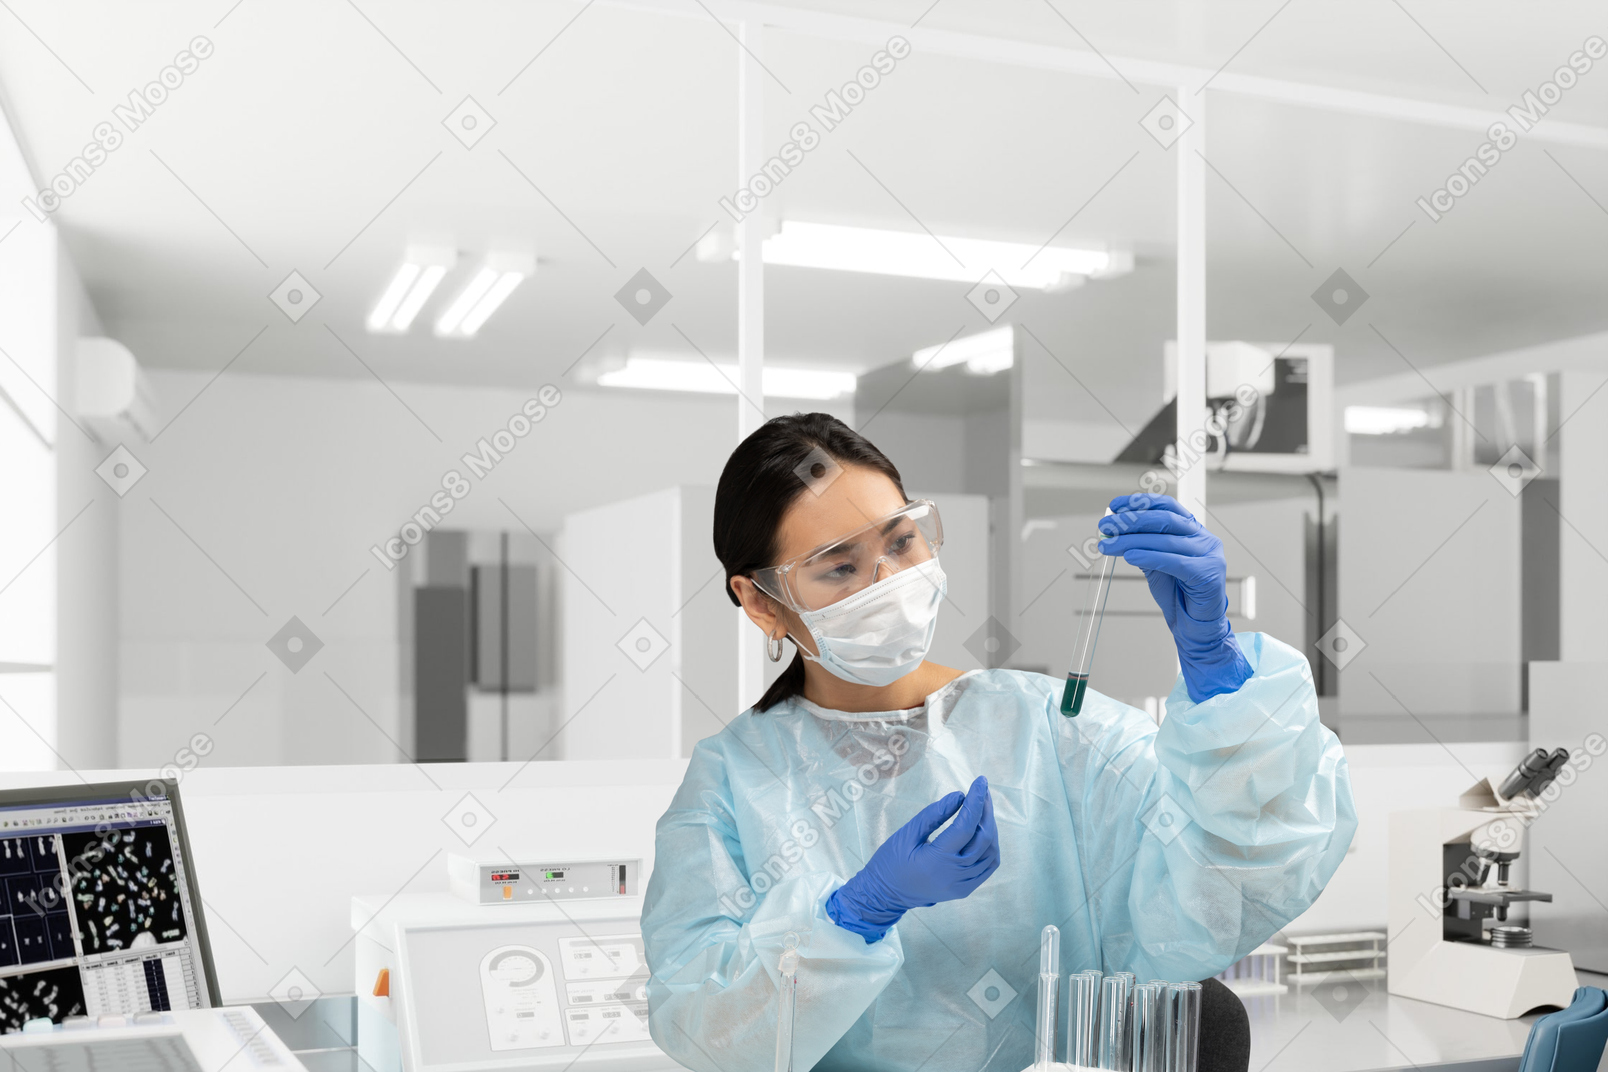 A female scientist wearing protective mask and glasses and holding a test tube